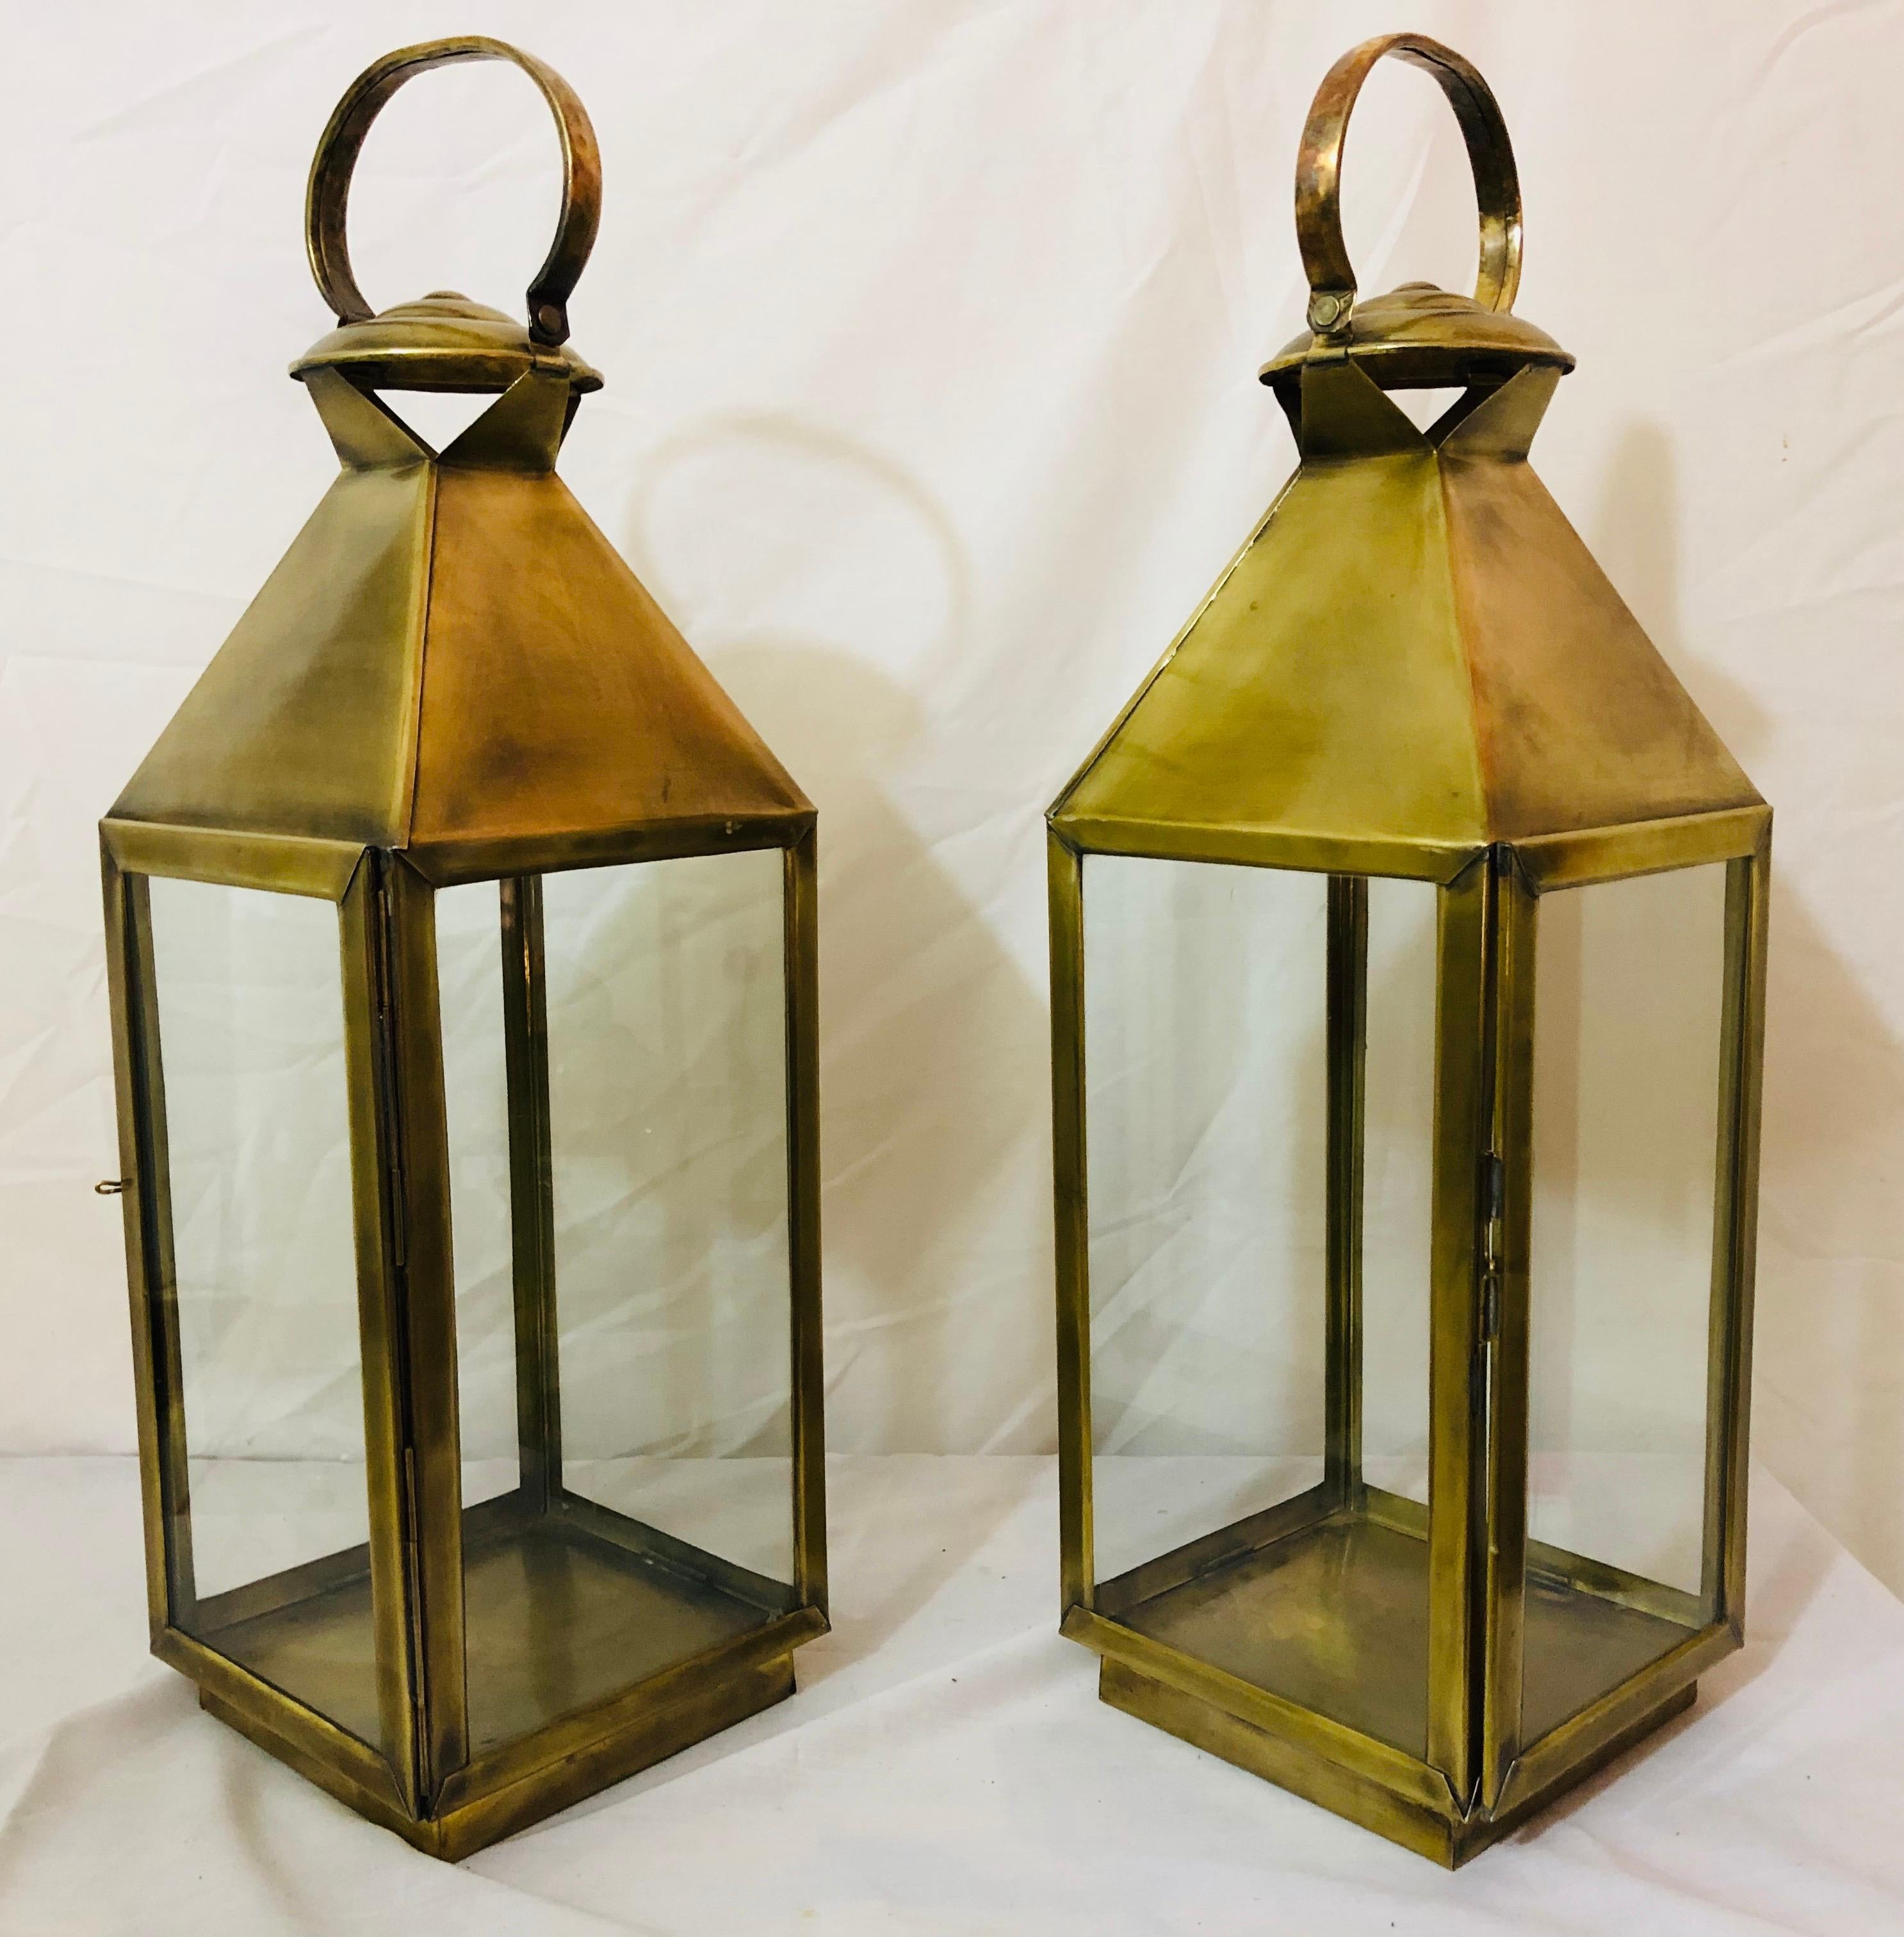 Brass lanterns or candleholder for indoor and outdoor, a pair

This classy pair of handmade lanterns or candleholder is made of fine brass and will look beautiful indoor in your living room or bathroom to create a spa feel or outdoor in your garden.